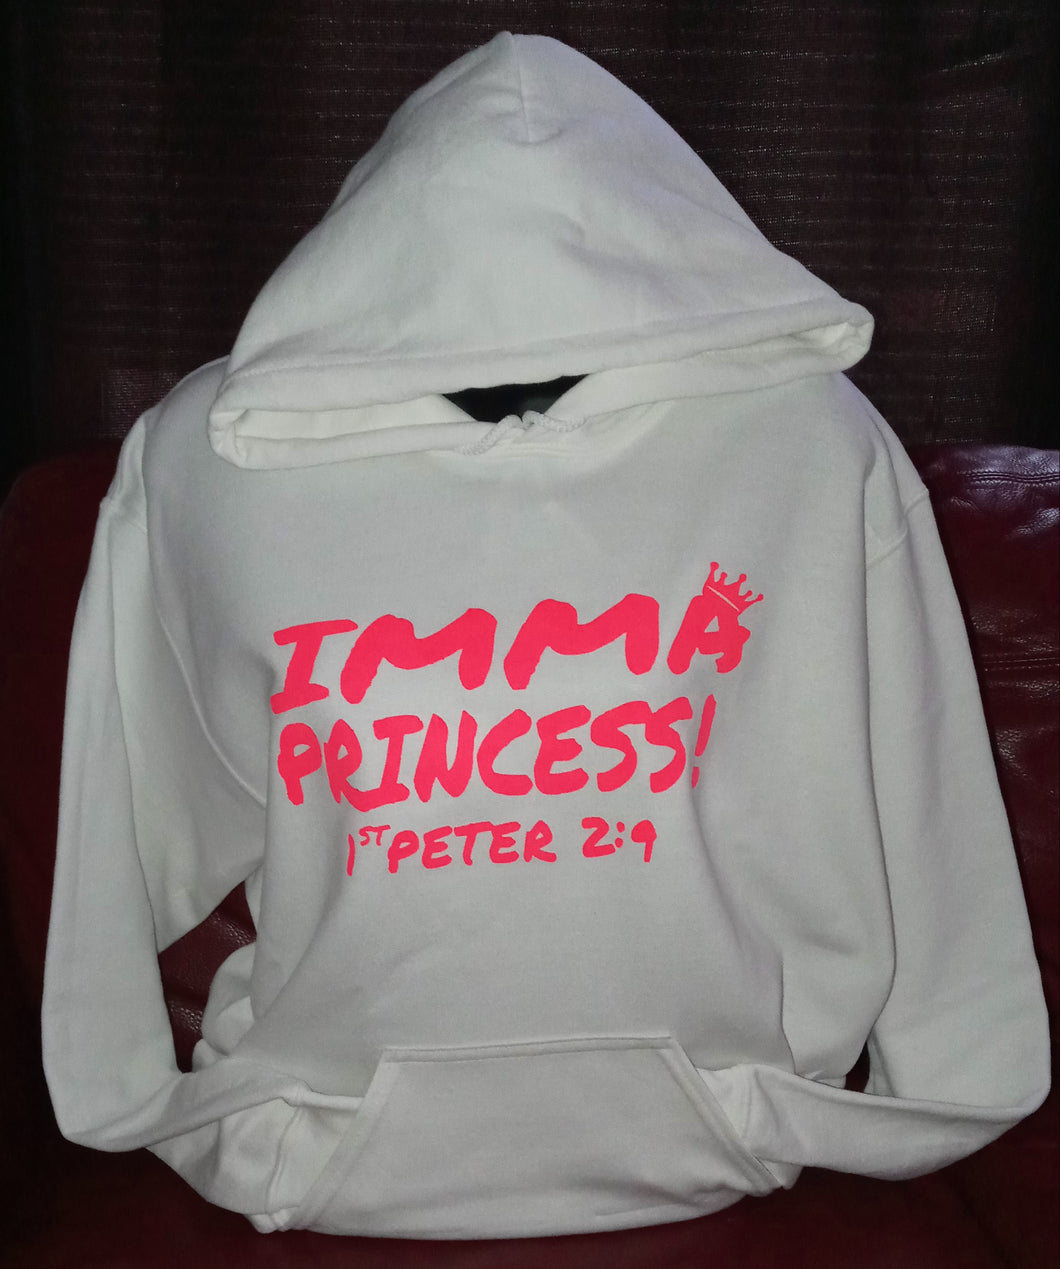 IMMA PRINCESS! 1st Peter 2:9 White hoodie with Hot Pink lettering